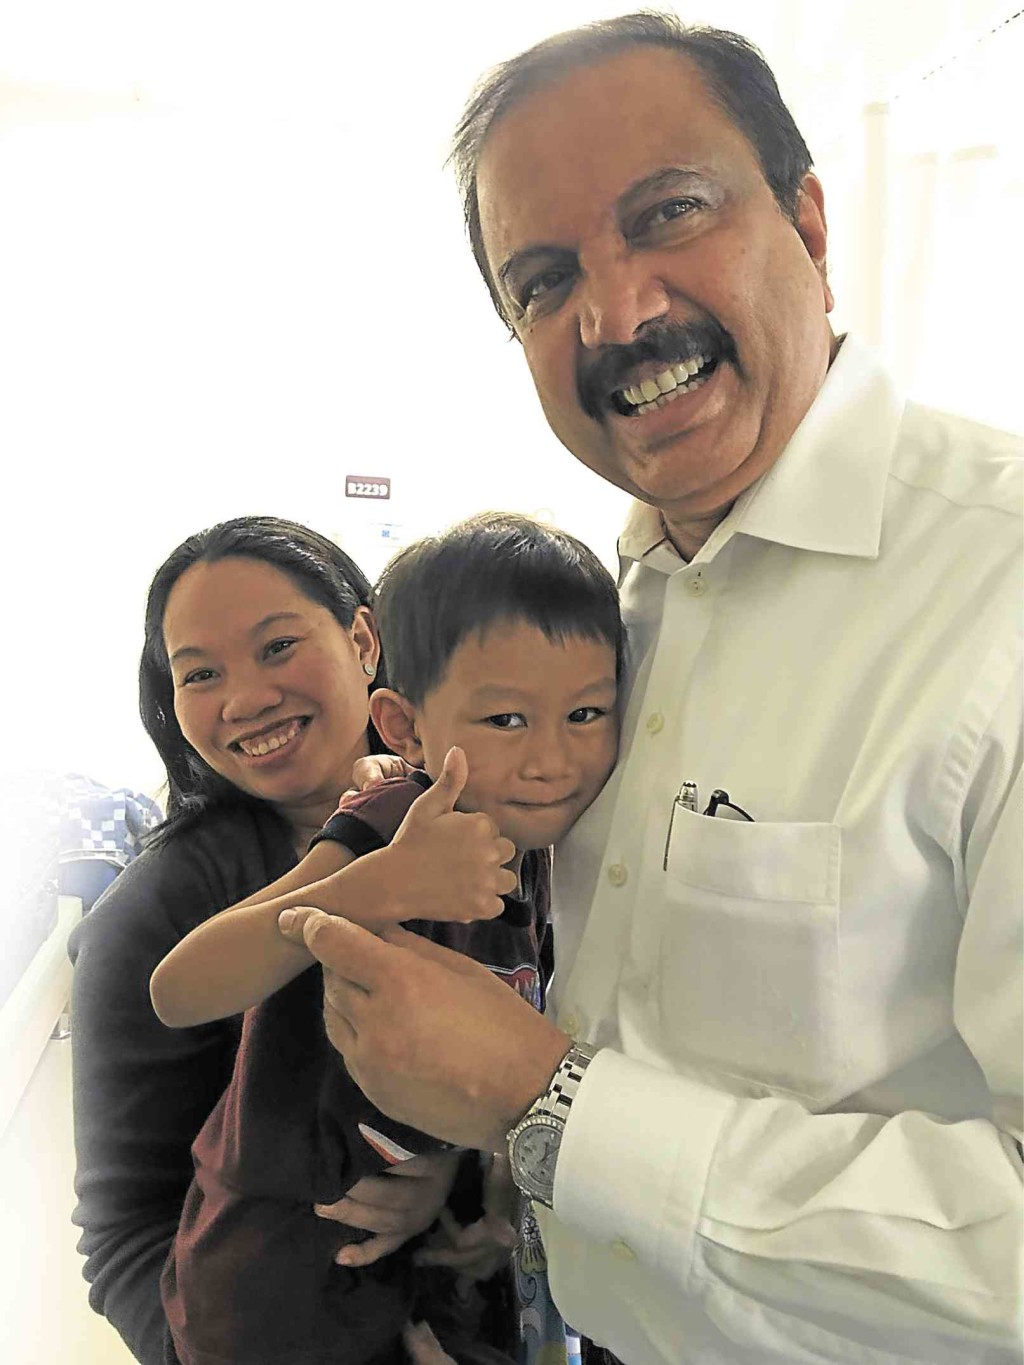 DM Foundation chair Dr. Azad Moopen (right) with Joneil Dasi-an and his mom Richelle after the child’s surgery at the Aster Medcity, Kochi, India